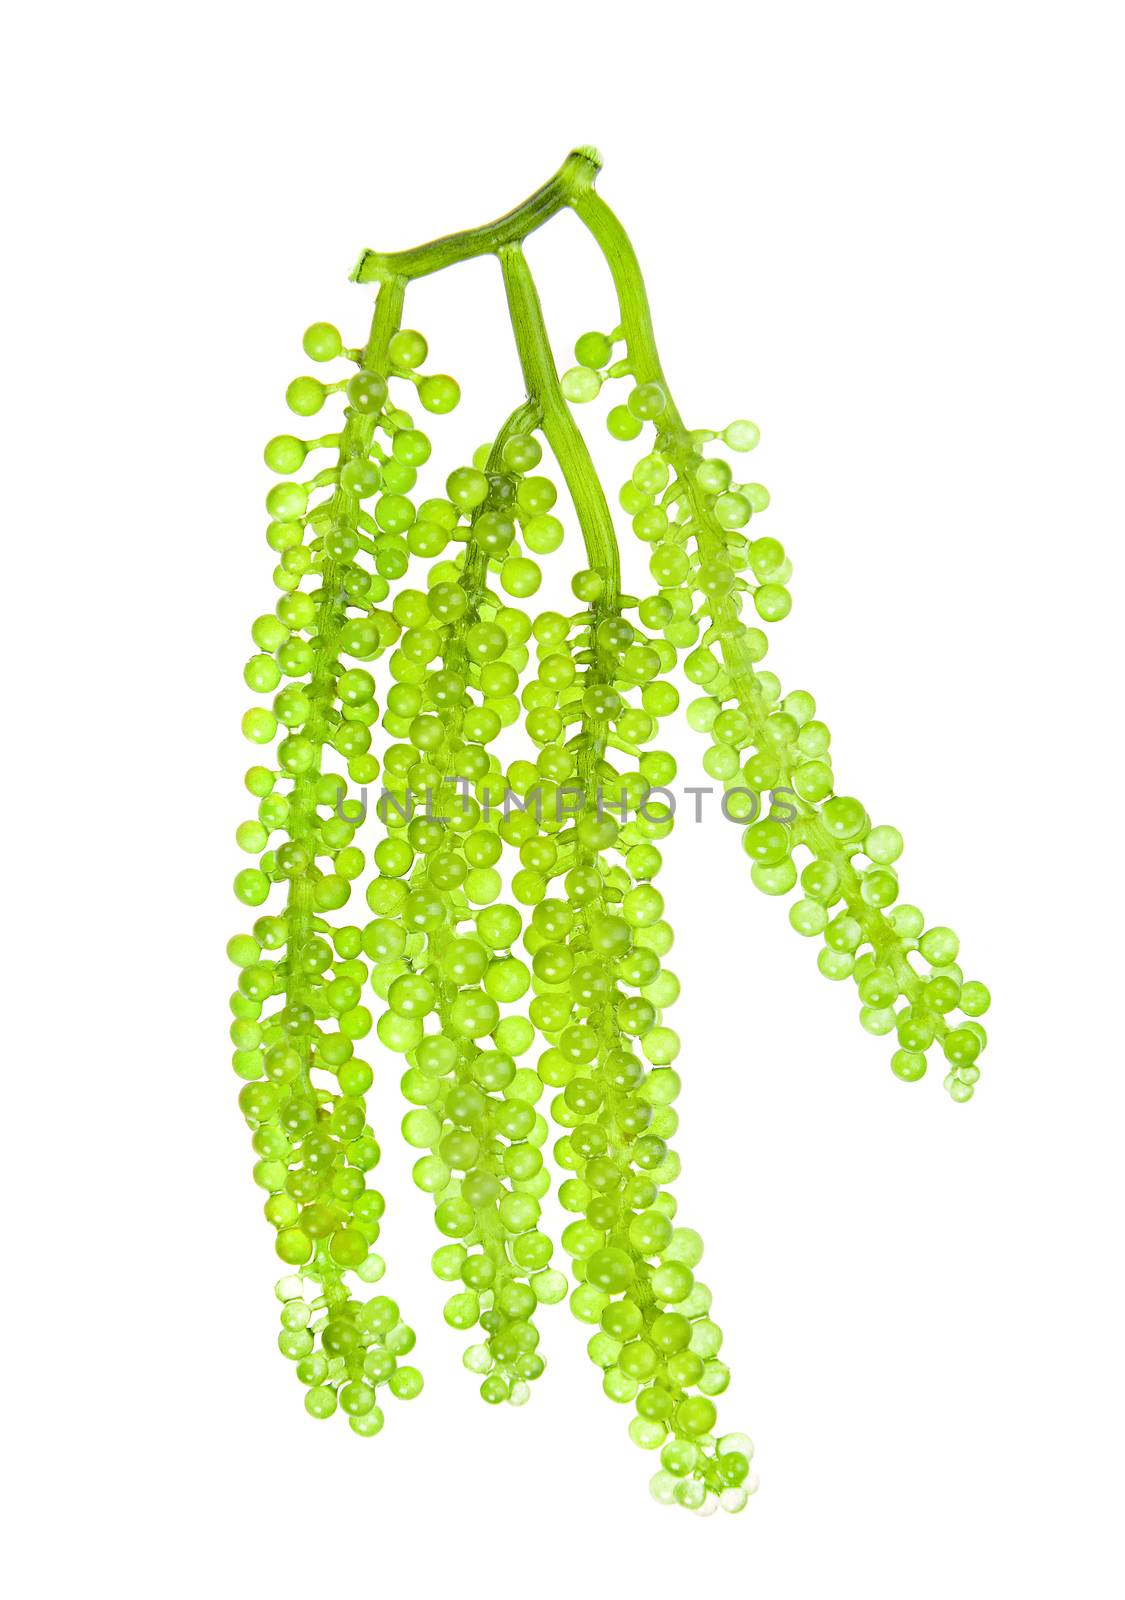 Sea grapes ( green caviar ) seaweed on white background by sommai